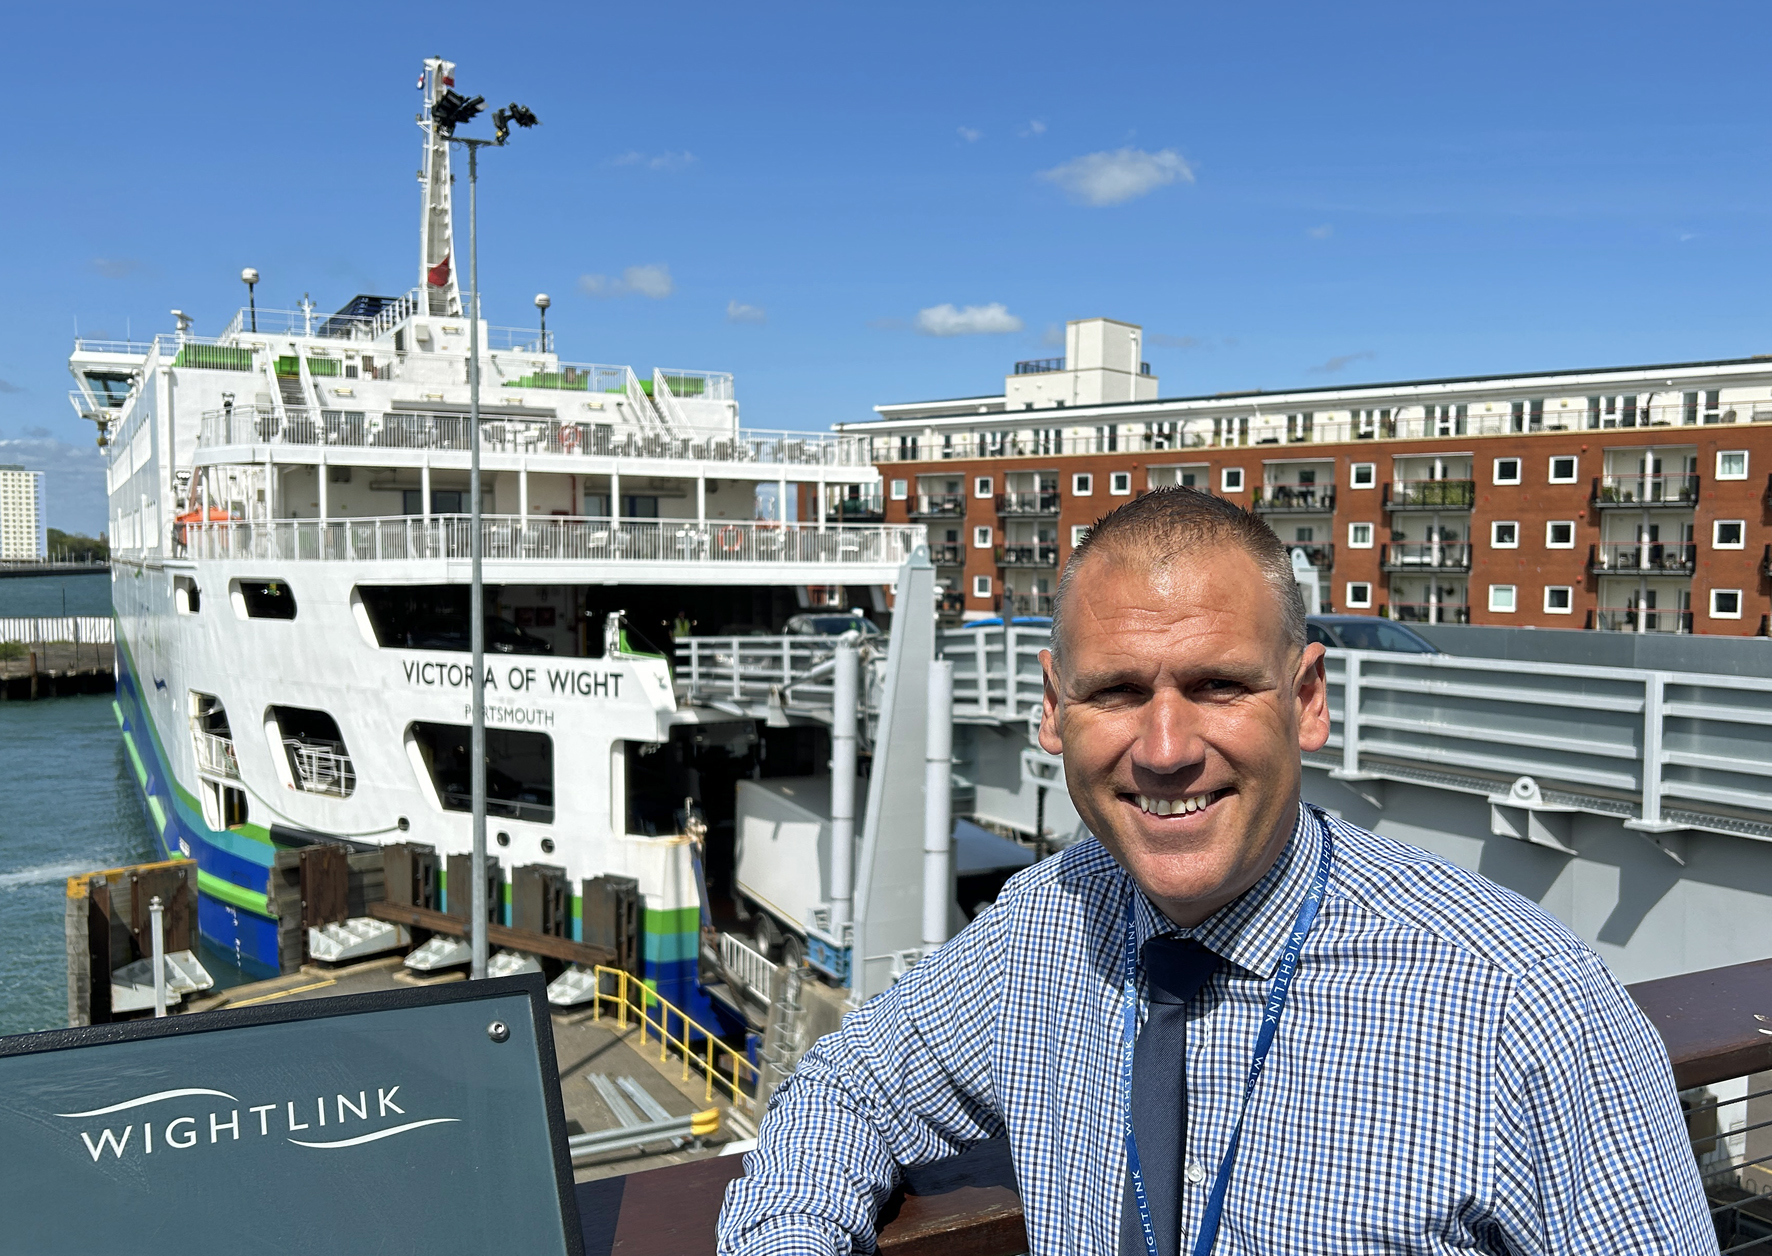 A man wearing a shirt and tie with a ferry in the background